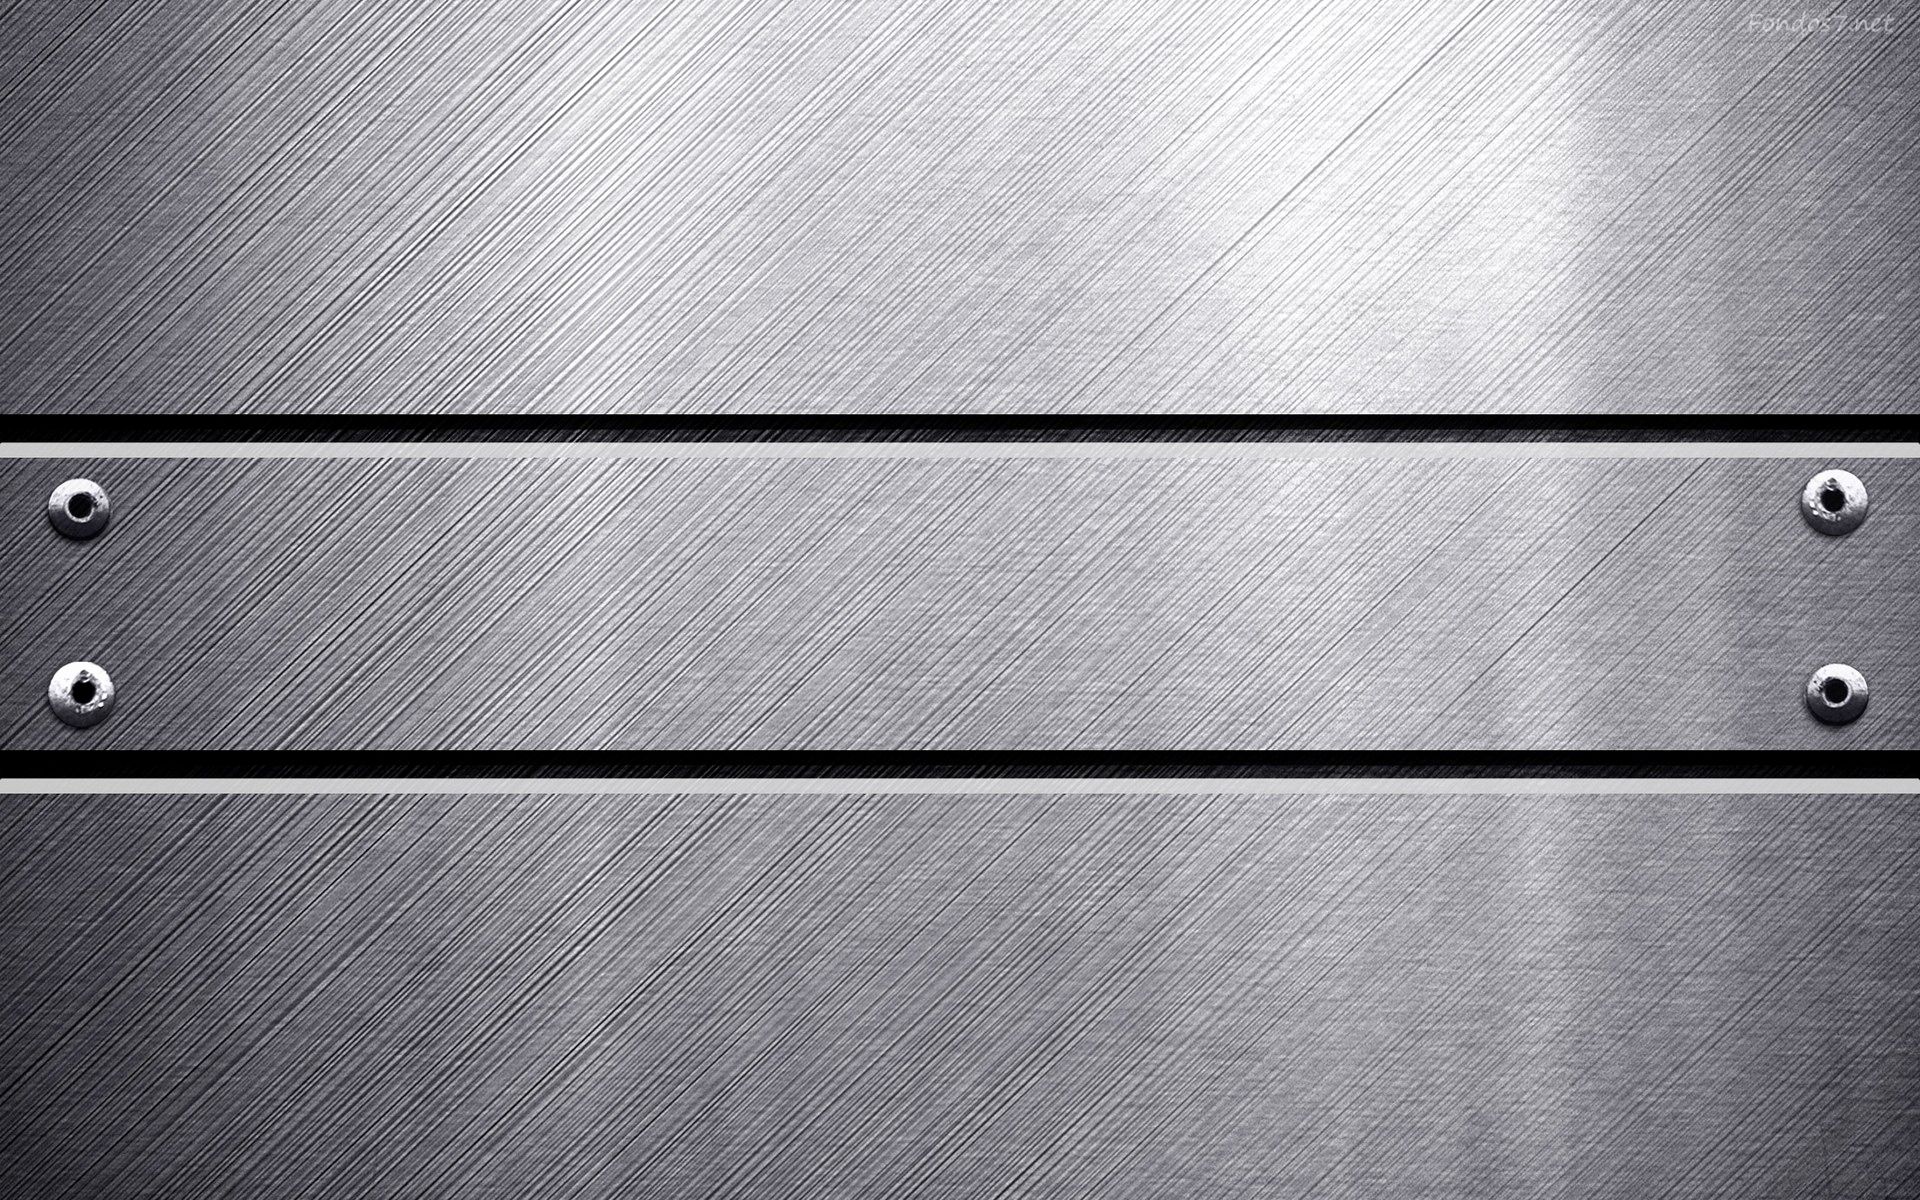 Stainless Steel Wallpaper Lovely HD Metal Wallpaper & Metallic Background for Free Desktop Download Combination of The Hudson